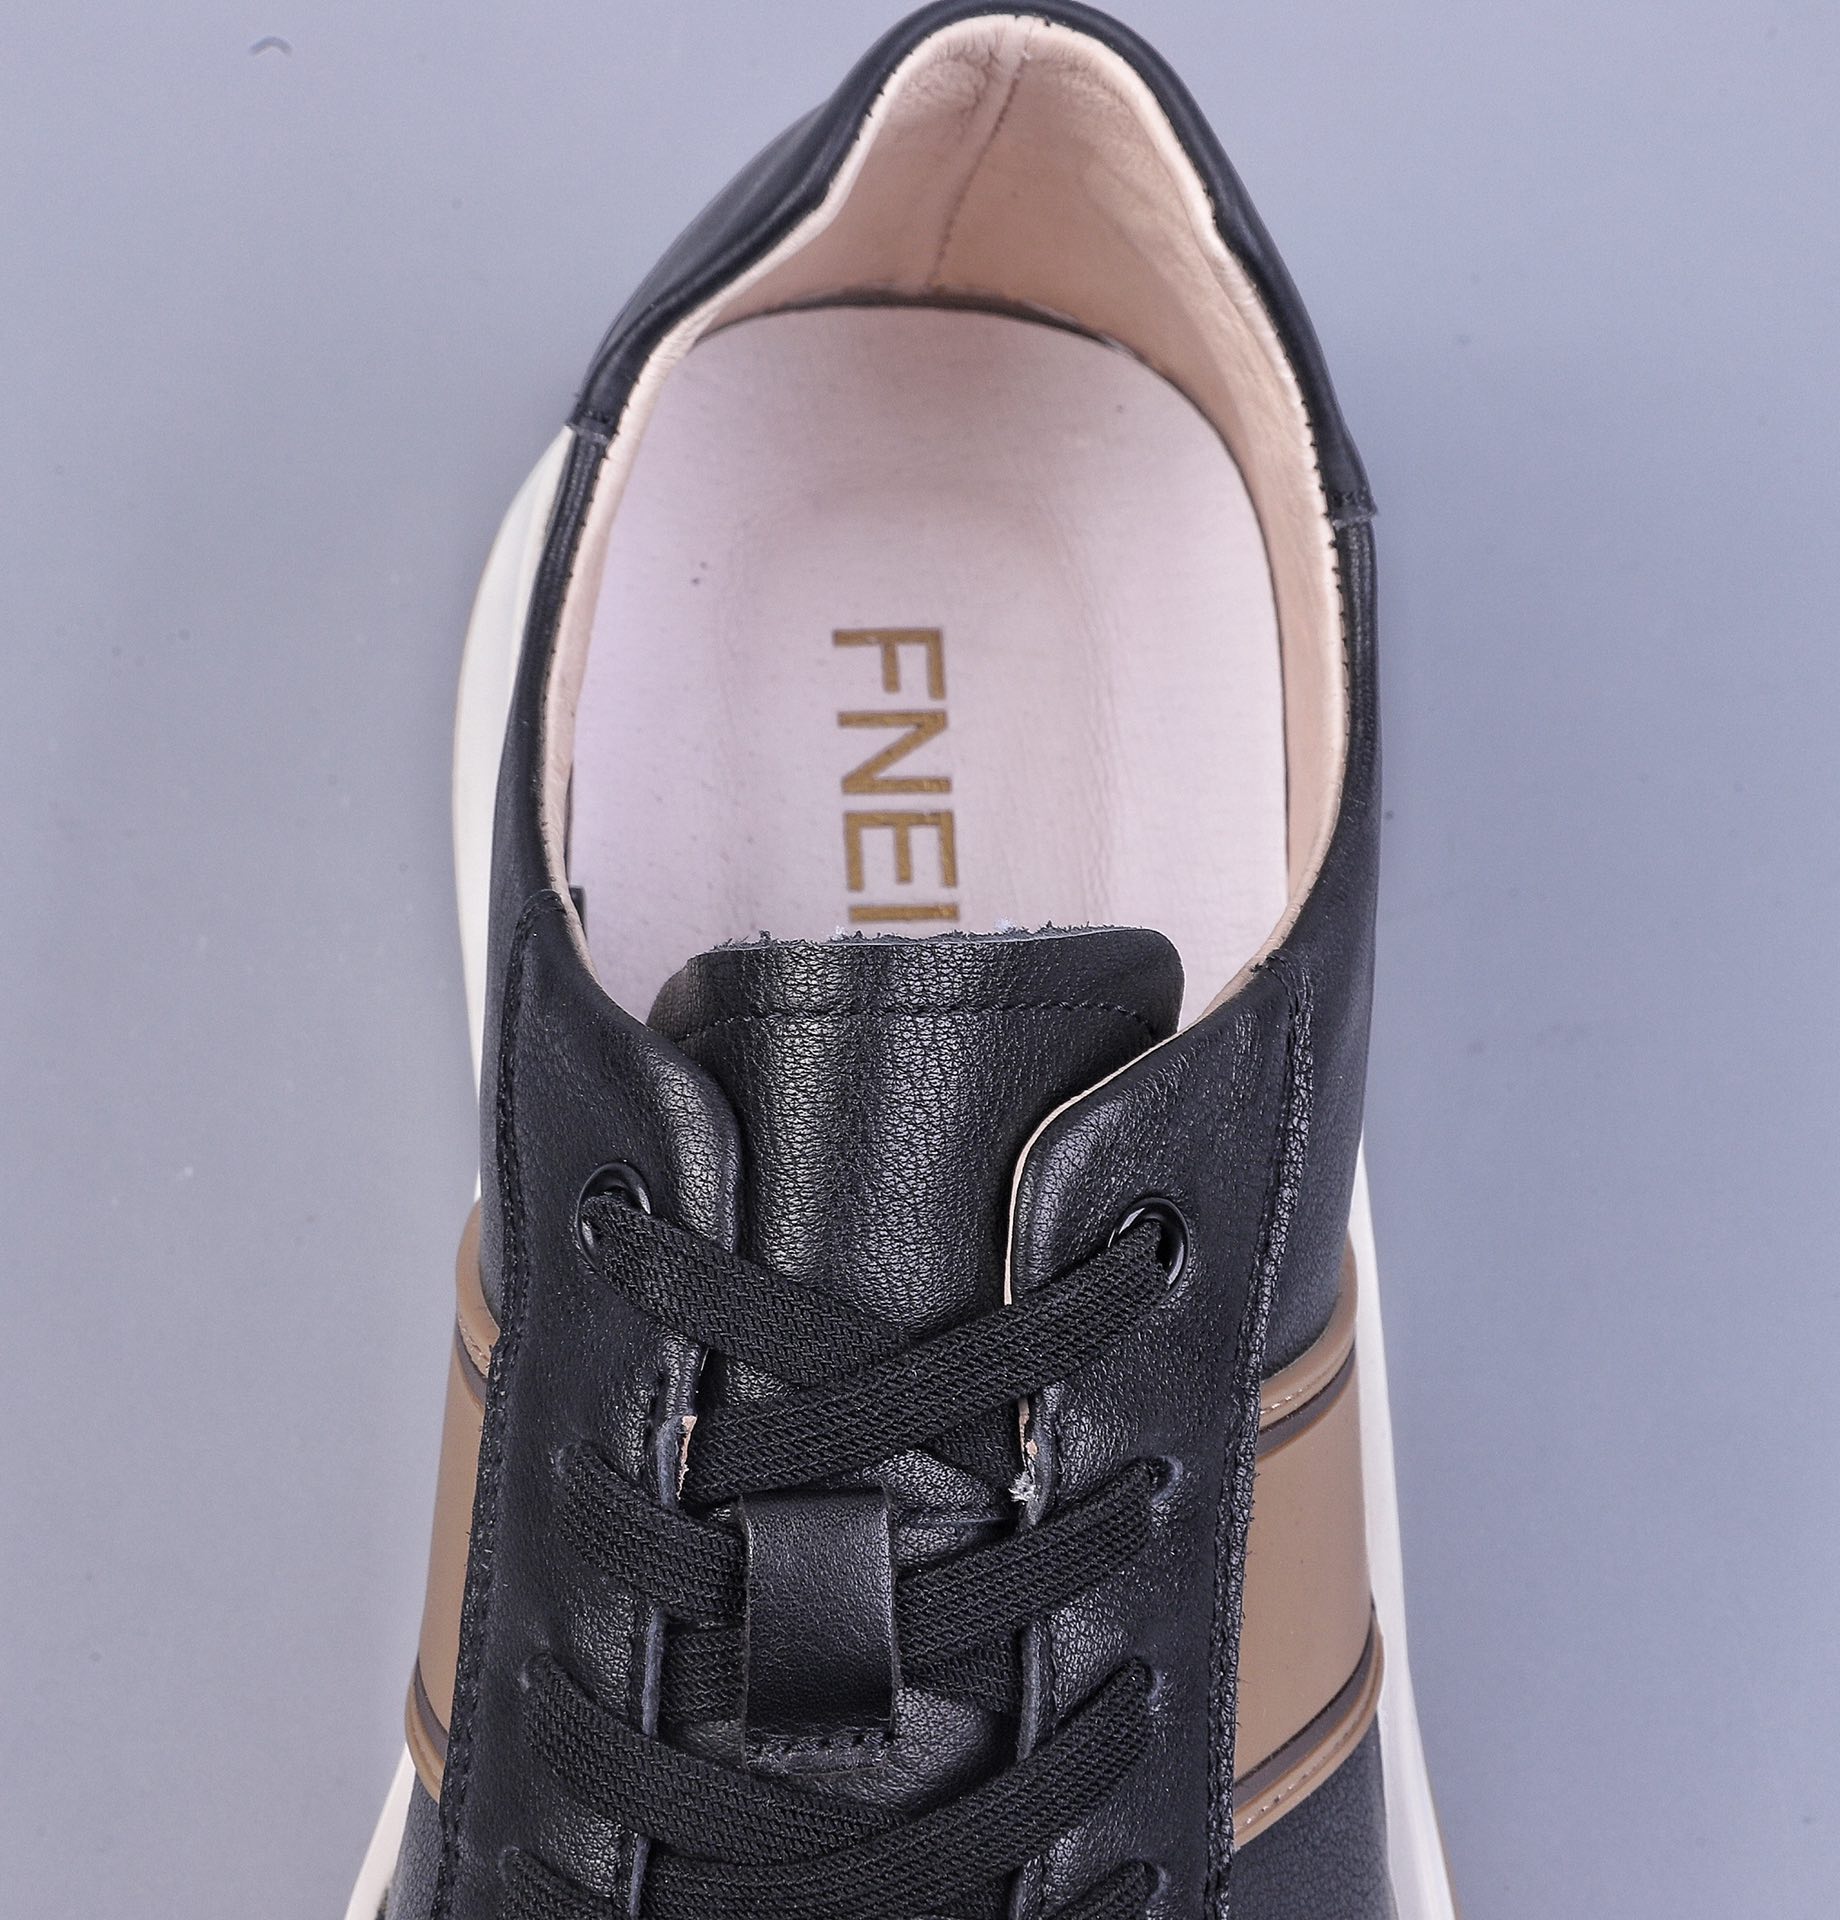 New arrival #Overseas version of FENDI high-end casual sports shoes series